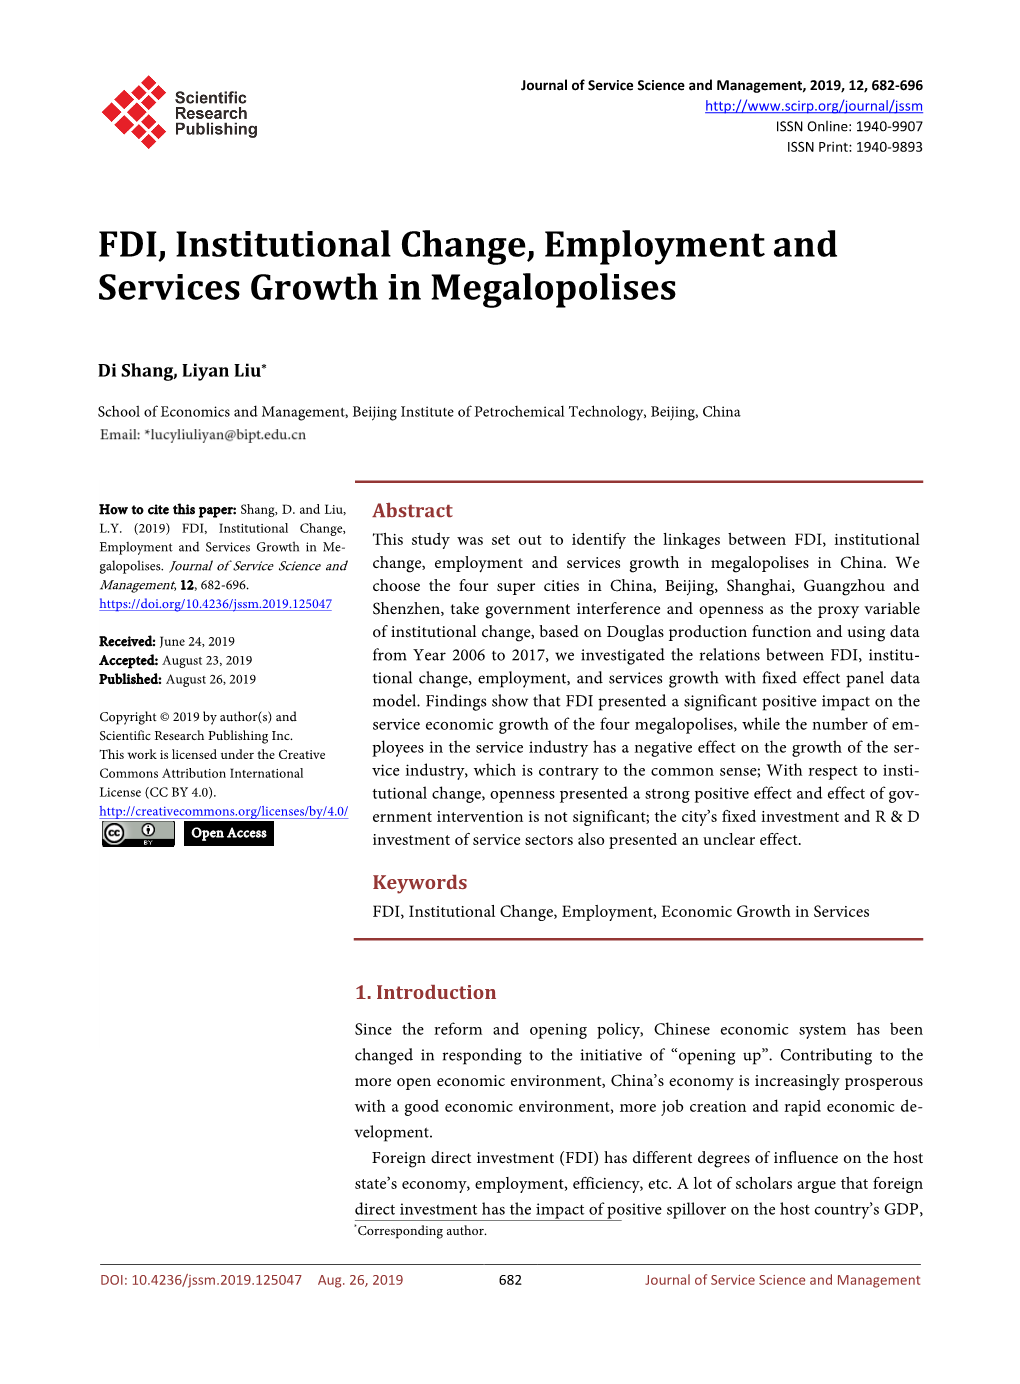 FDI, Institutional Change, Employment and Services Growth in Megalopolises